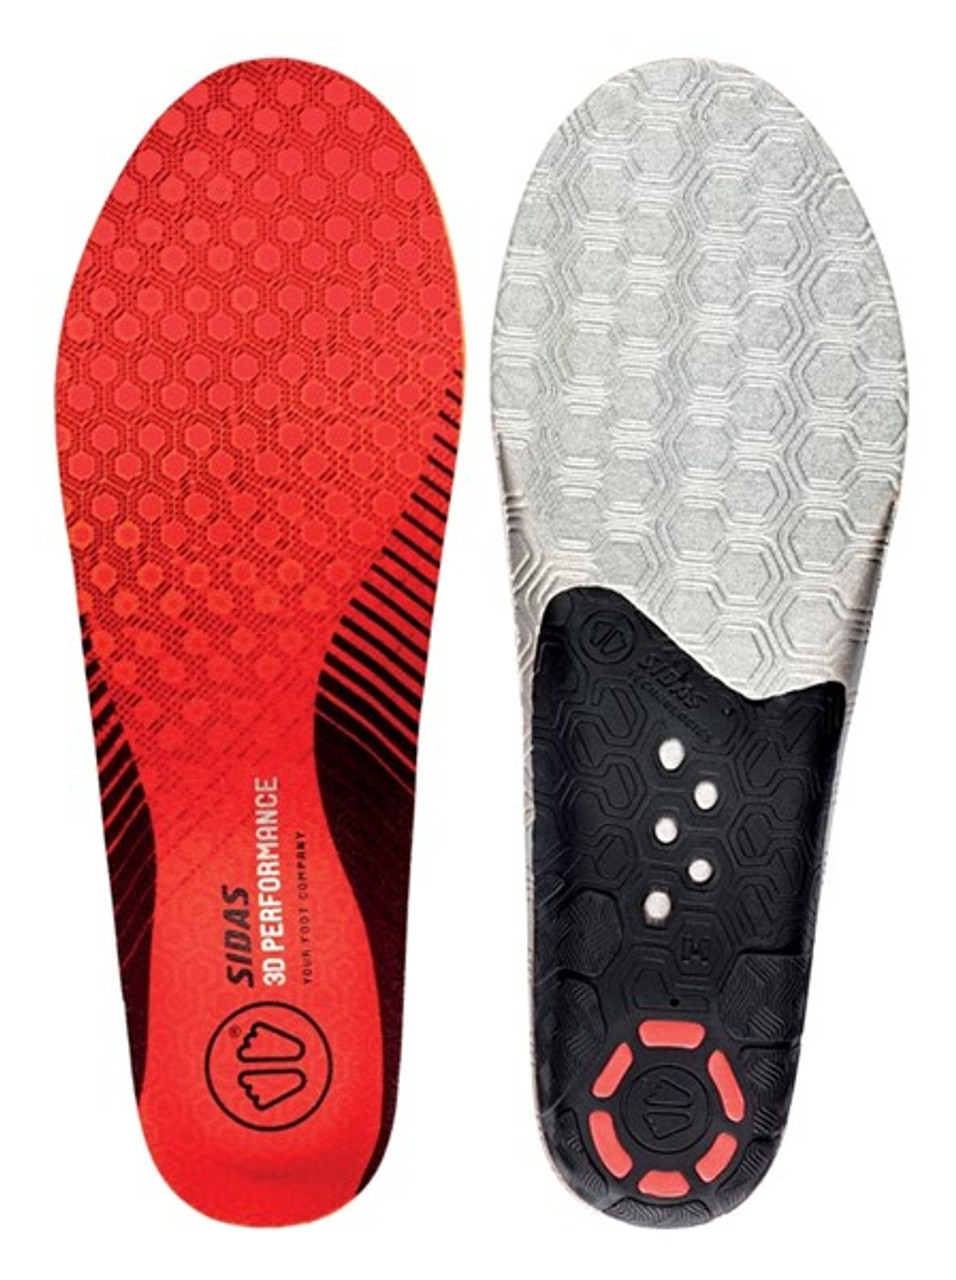 3D Winter Performance Insole